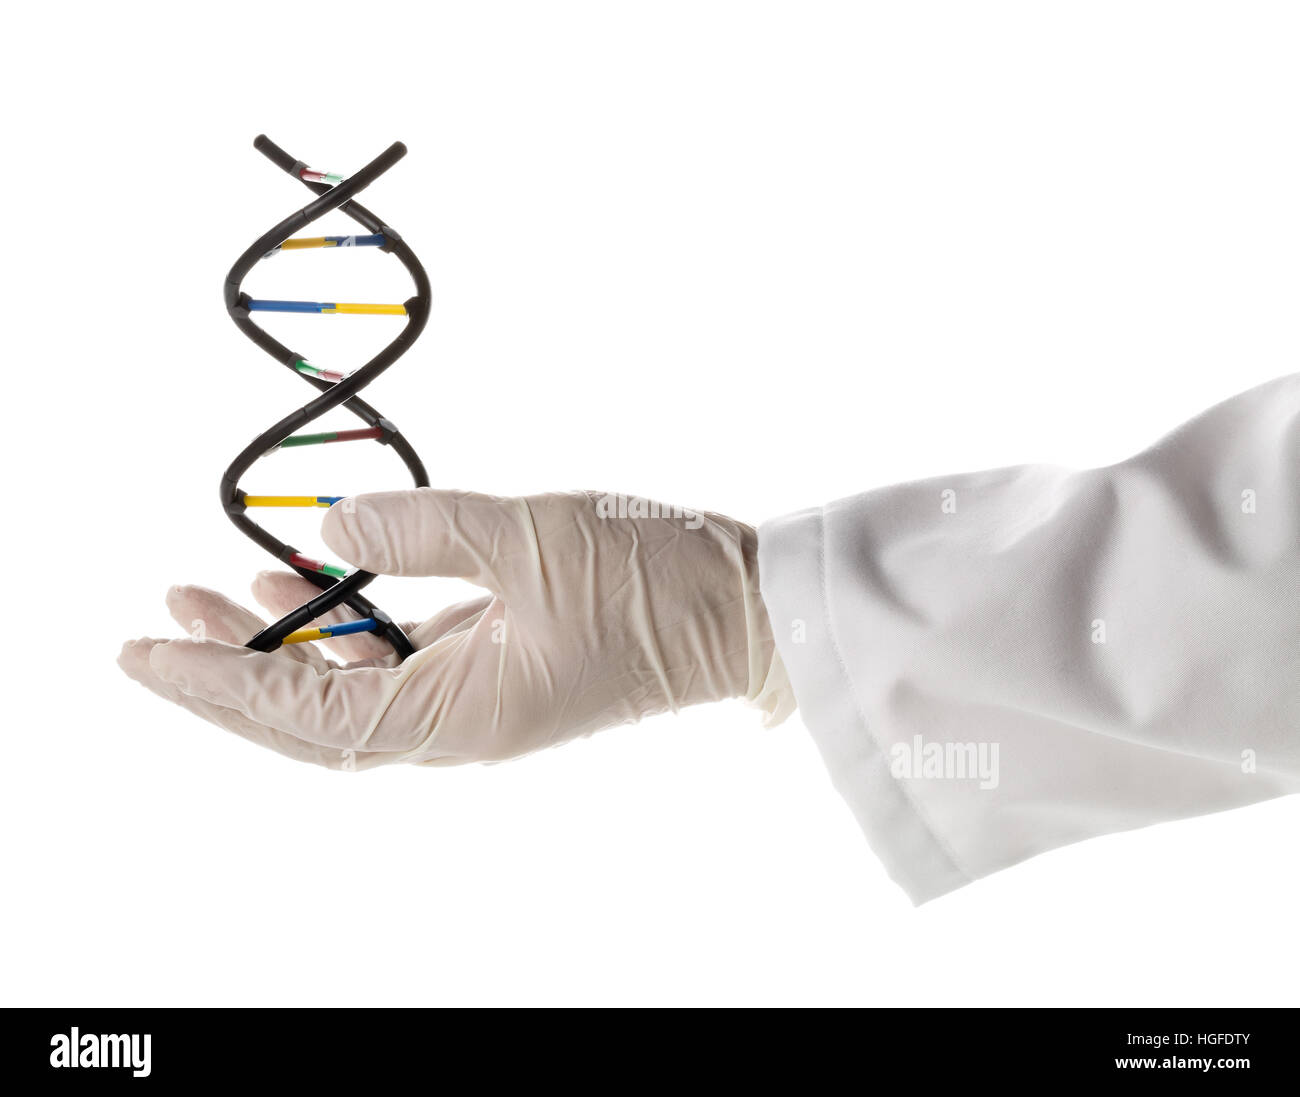 Researcher with glove holding DNA molecule model isolated on white background Stock Photo